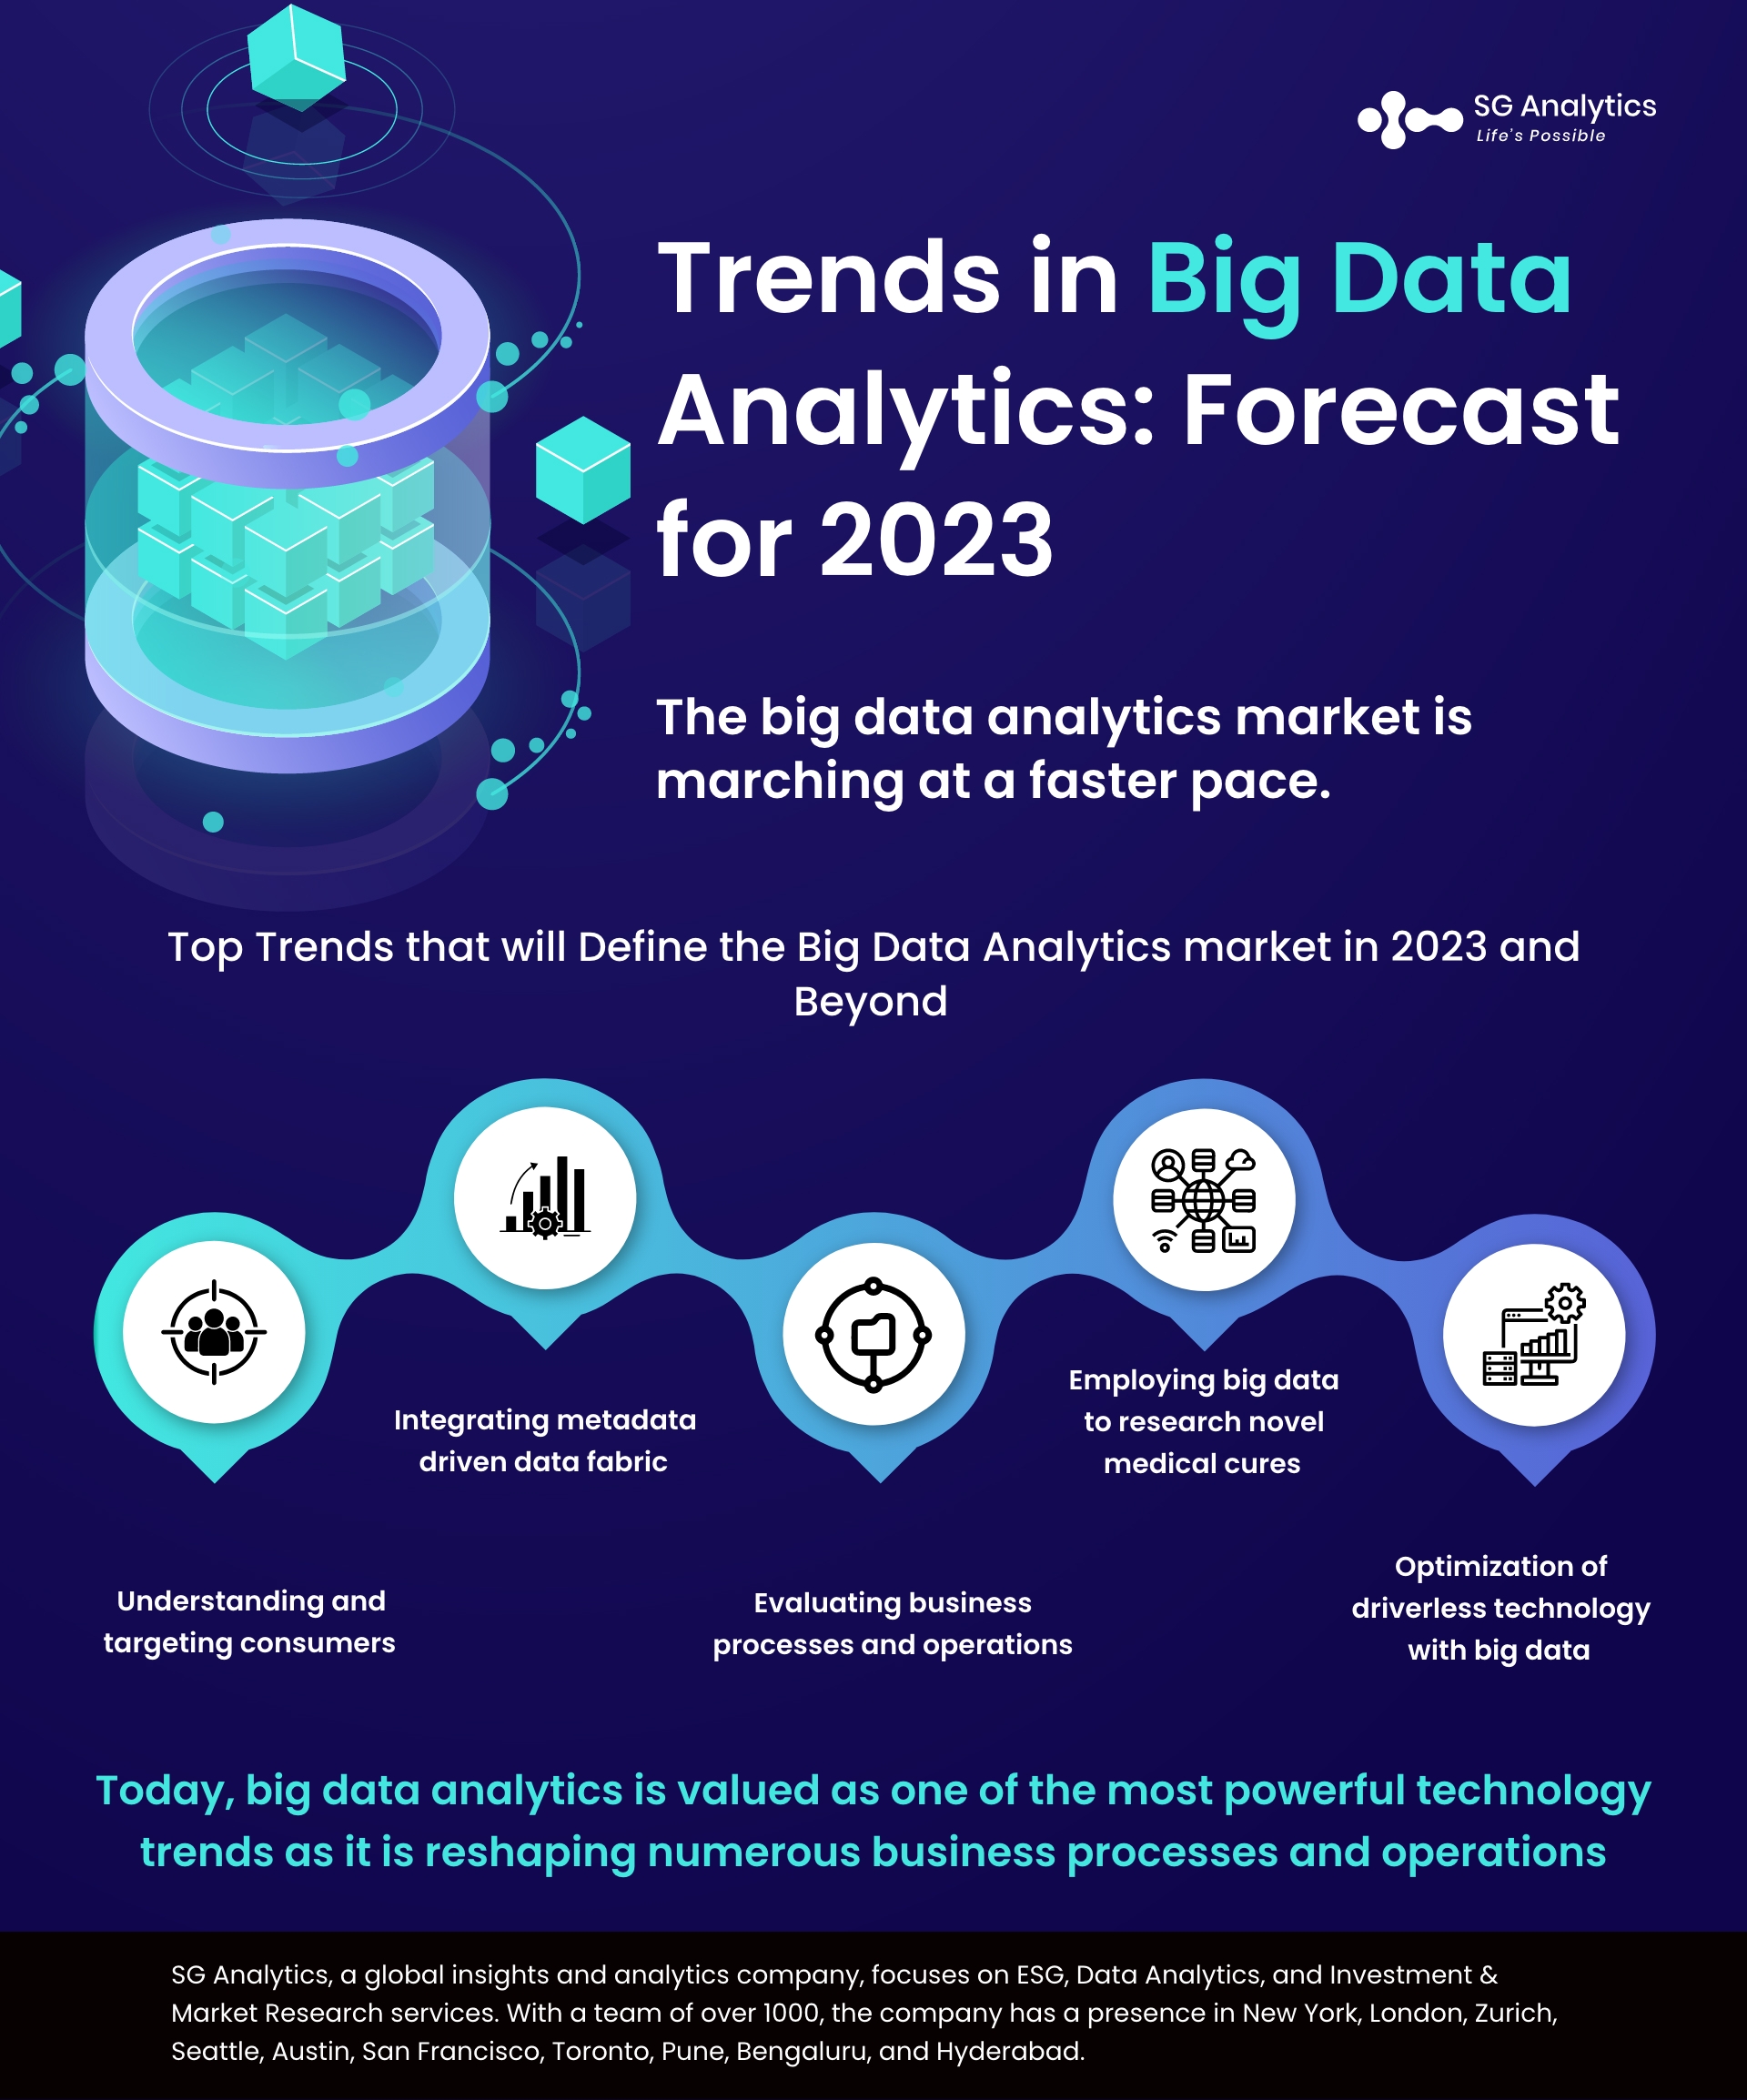 Latest Big Data Trends and Predictions to watch out for in 2023